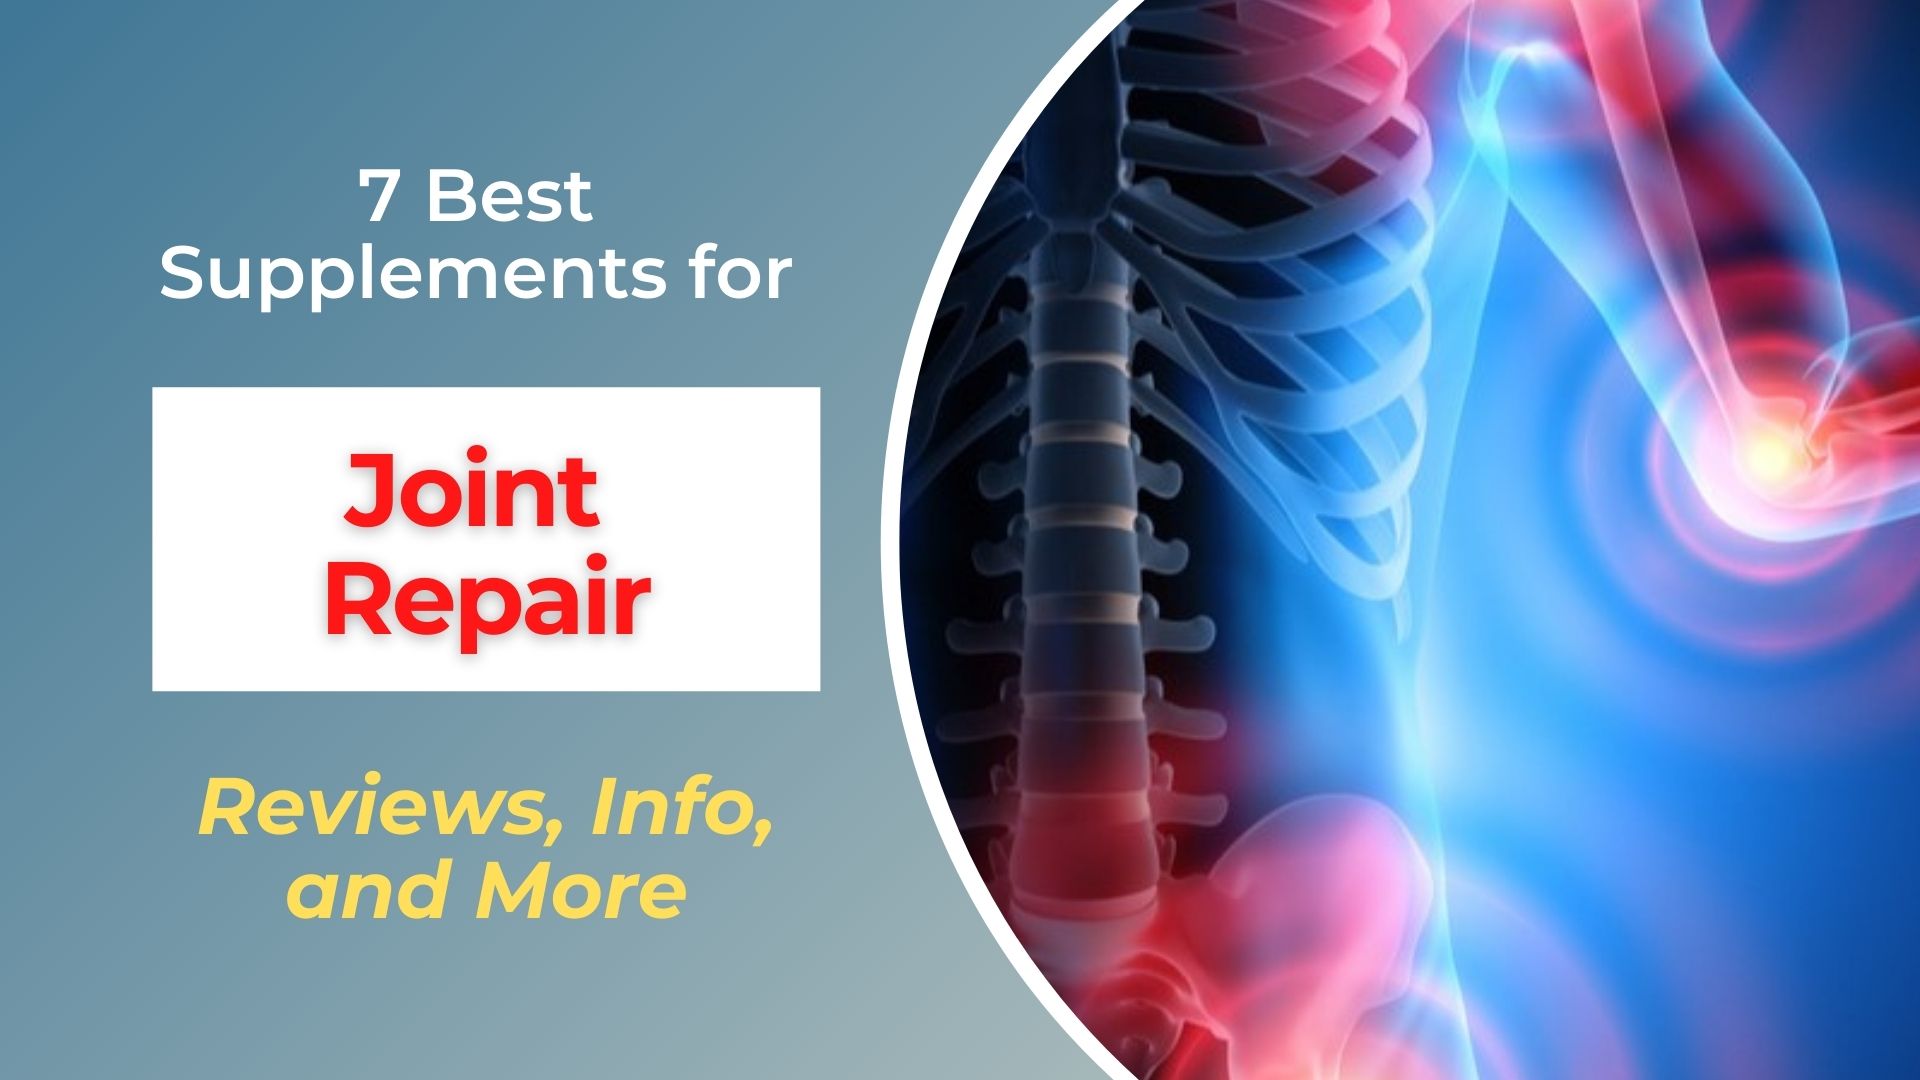 Best Supplements for Joint Repair